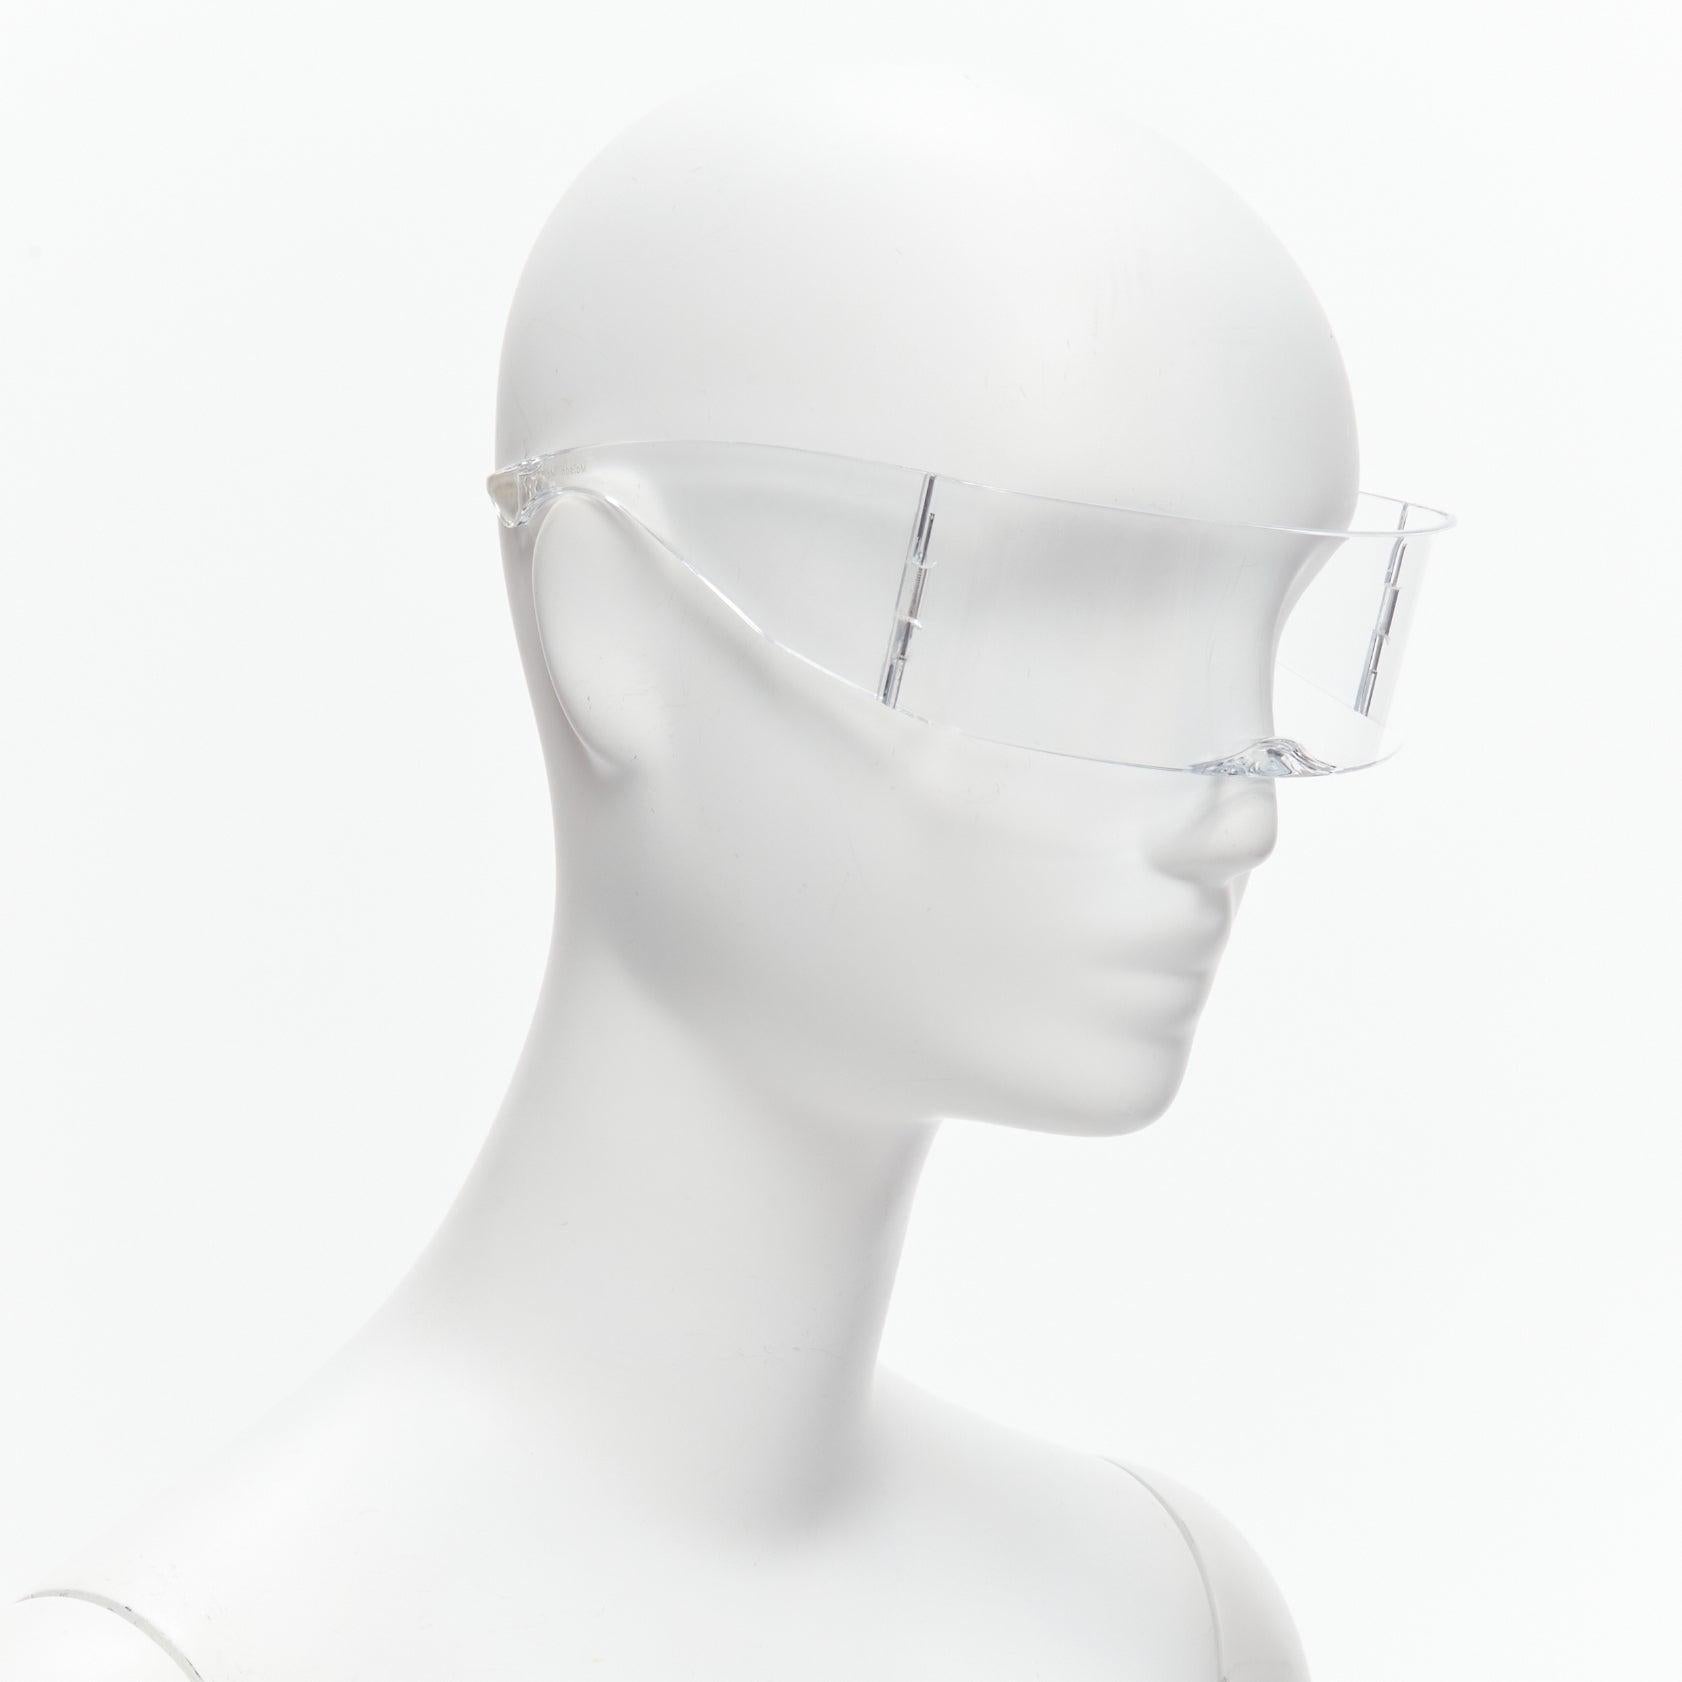 rare MAISON MARTIN MARGIELA 2008 Runway MA1 Incognito clear shield sunglasses
Reference: TGAS/D00620
Brand: Maison Margiela
Designer: Martin Margiela
Model: MA1 Incognito
Collection: 2008 - Runway
Material: Plastic
Color: Clear
Pattern: